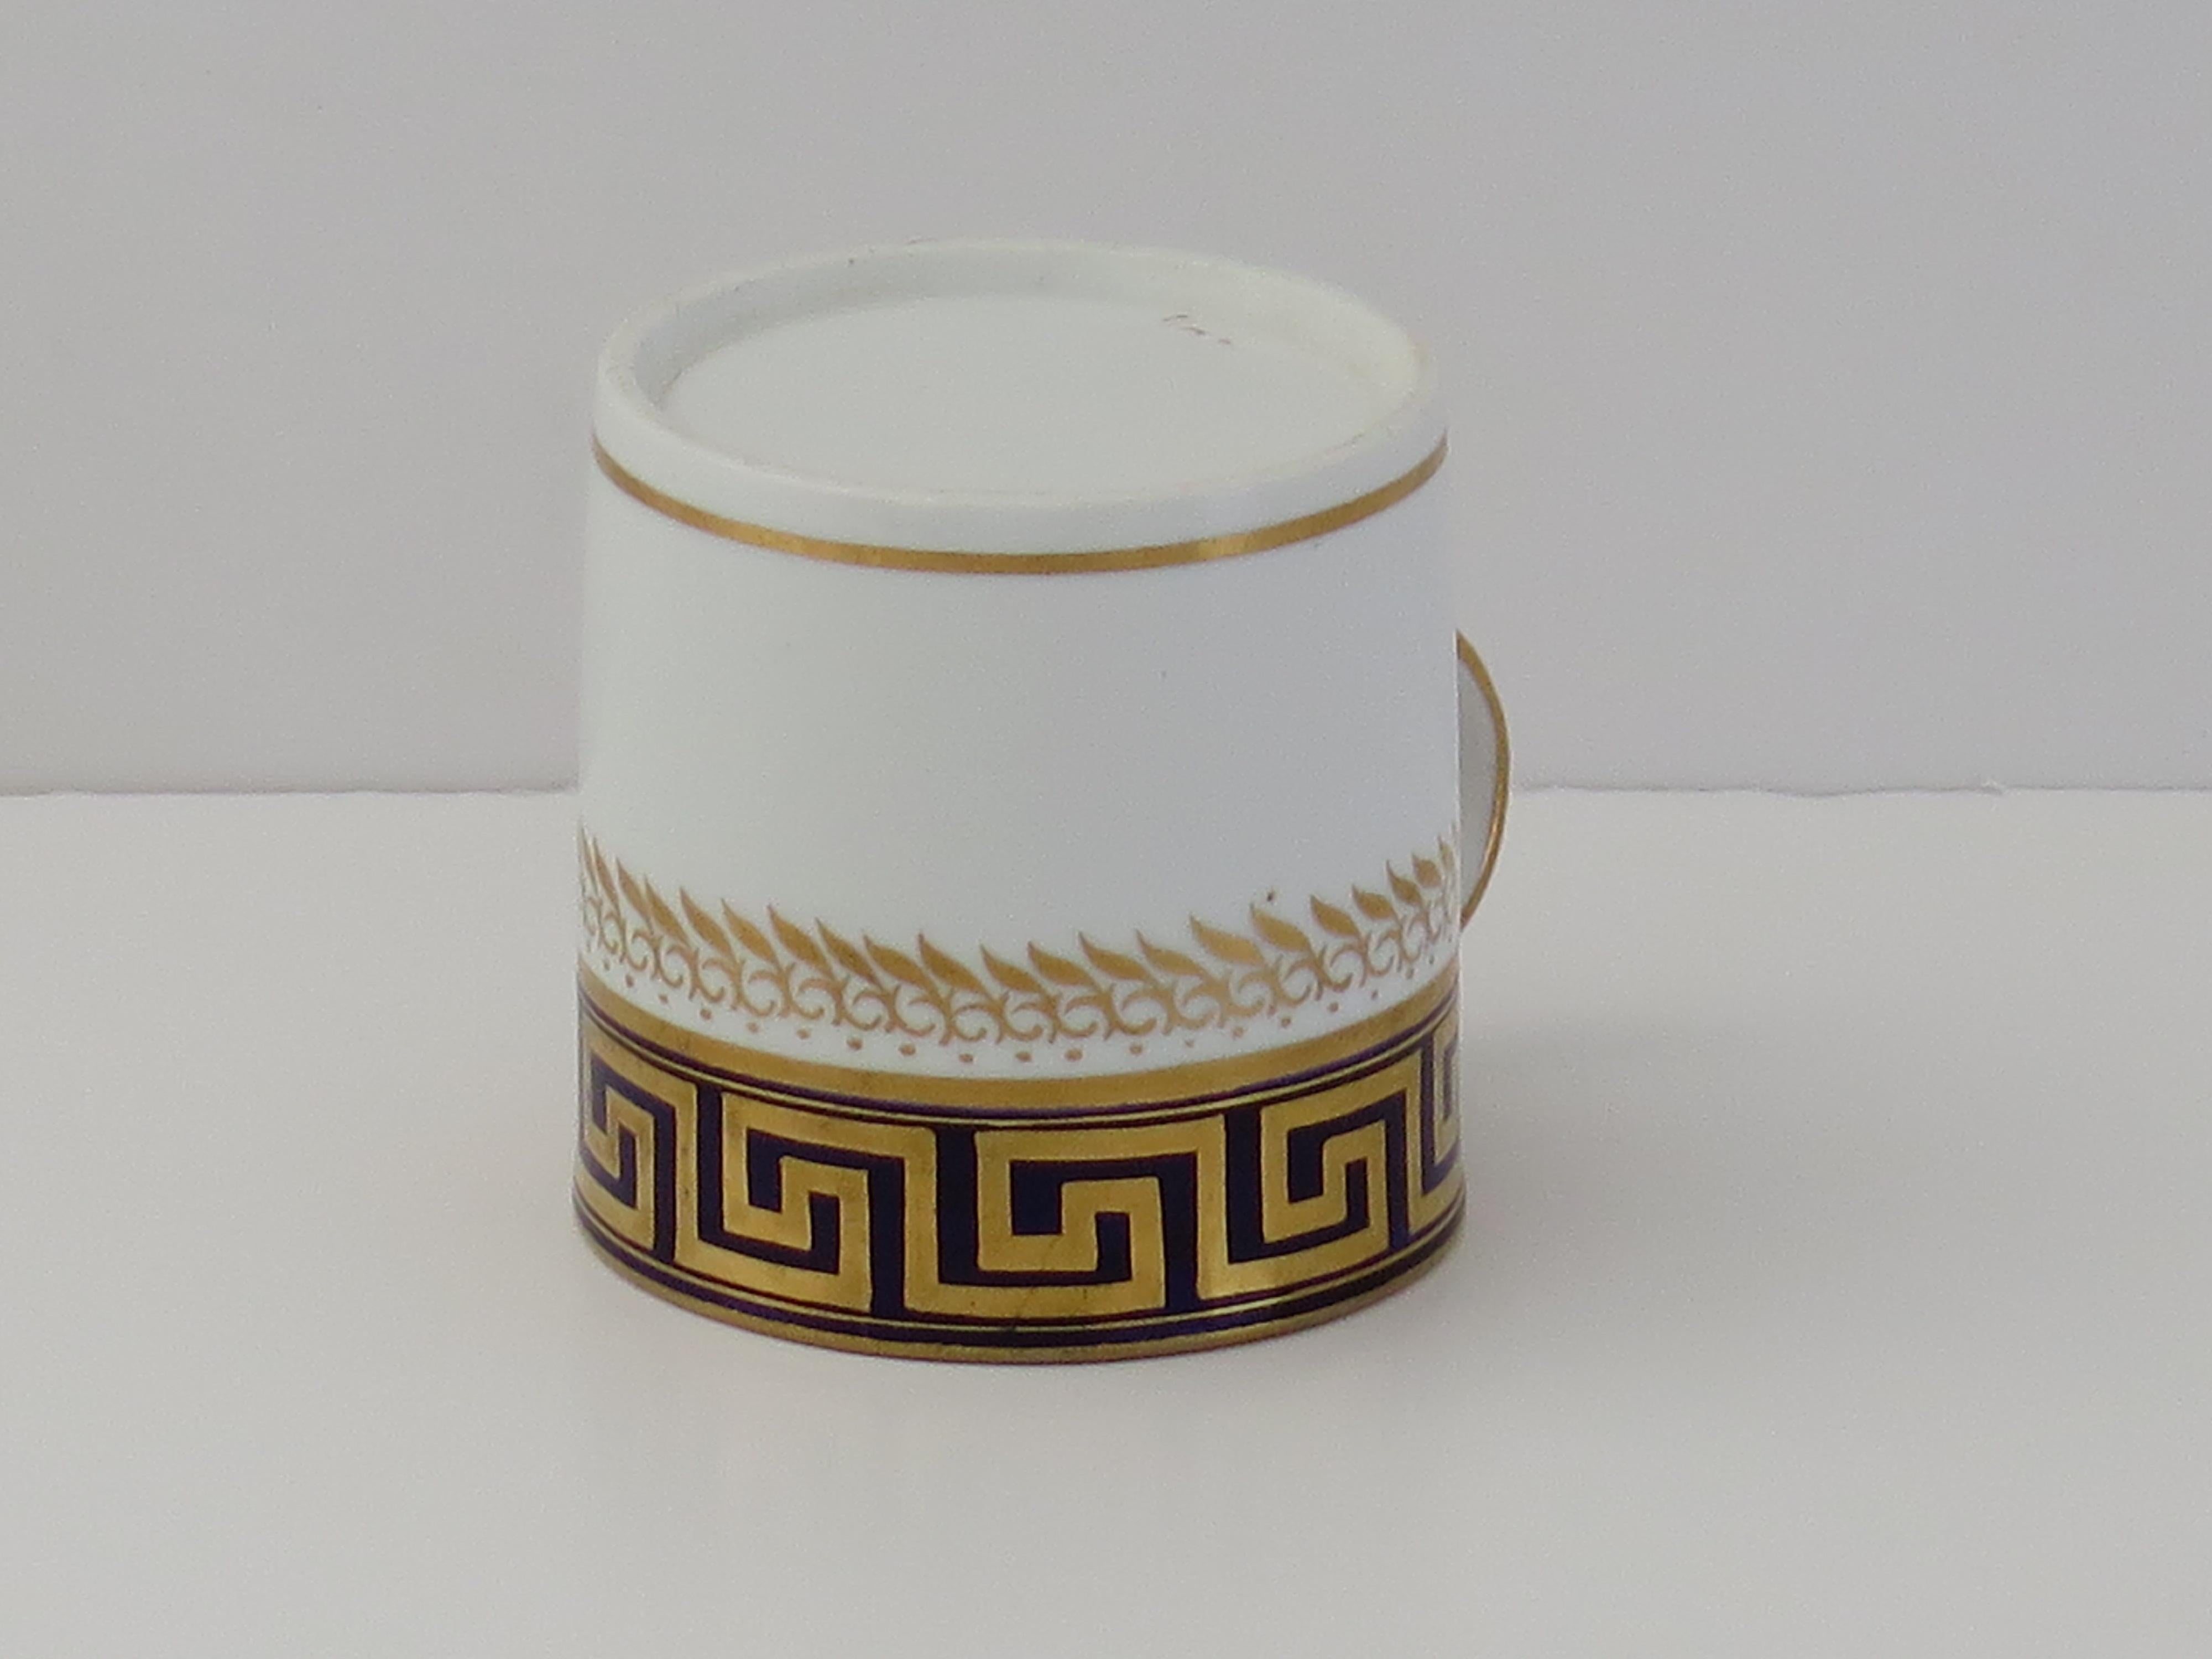 This is a very good example of an English George III period, porcelain, coffee can, made by Spode in the early 19th century, circa 1810.

The can is nominally straight sided and has the Spode loop handle with a pronounced kick or kink to the lower